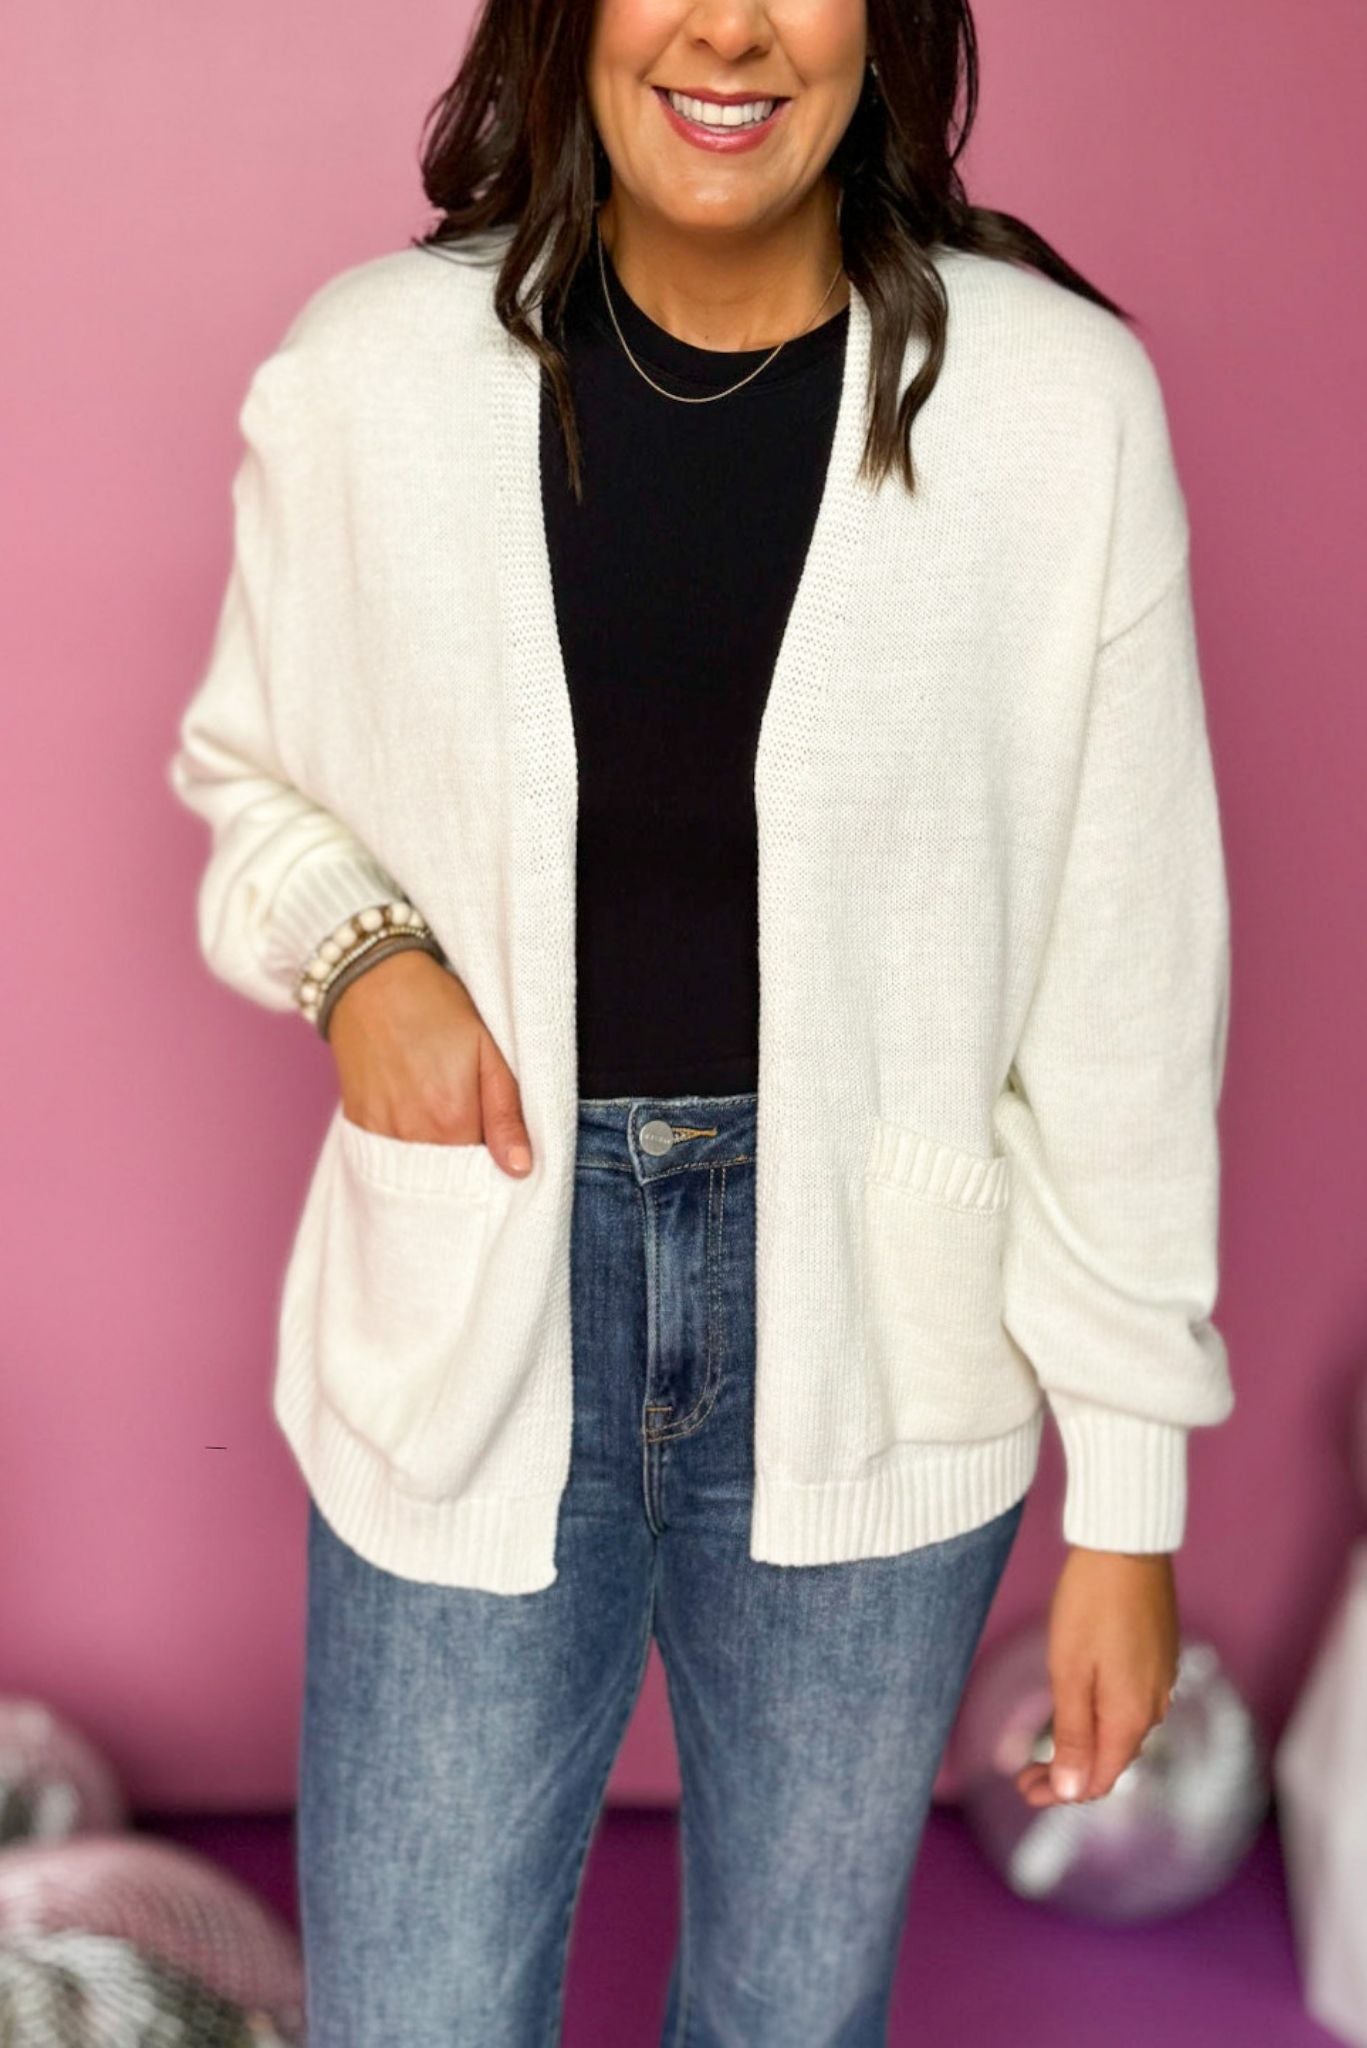 Cream Open Cardigan Knit Sweater, must have cardigan, must have style, fall style, fall fashion, elevated style, elevated cardigan, mom style, fall collection, fall cardigan, shop style your senses by mallory fitzsimmons